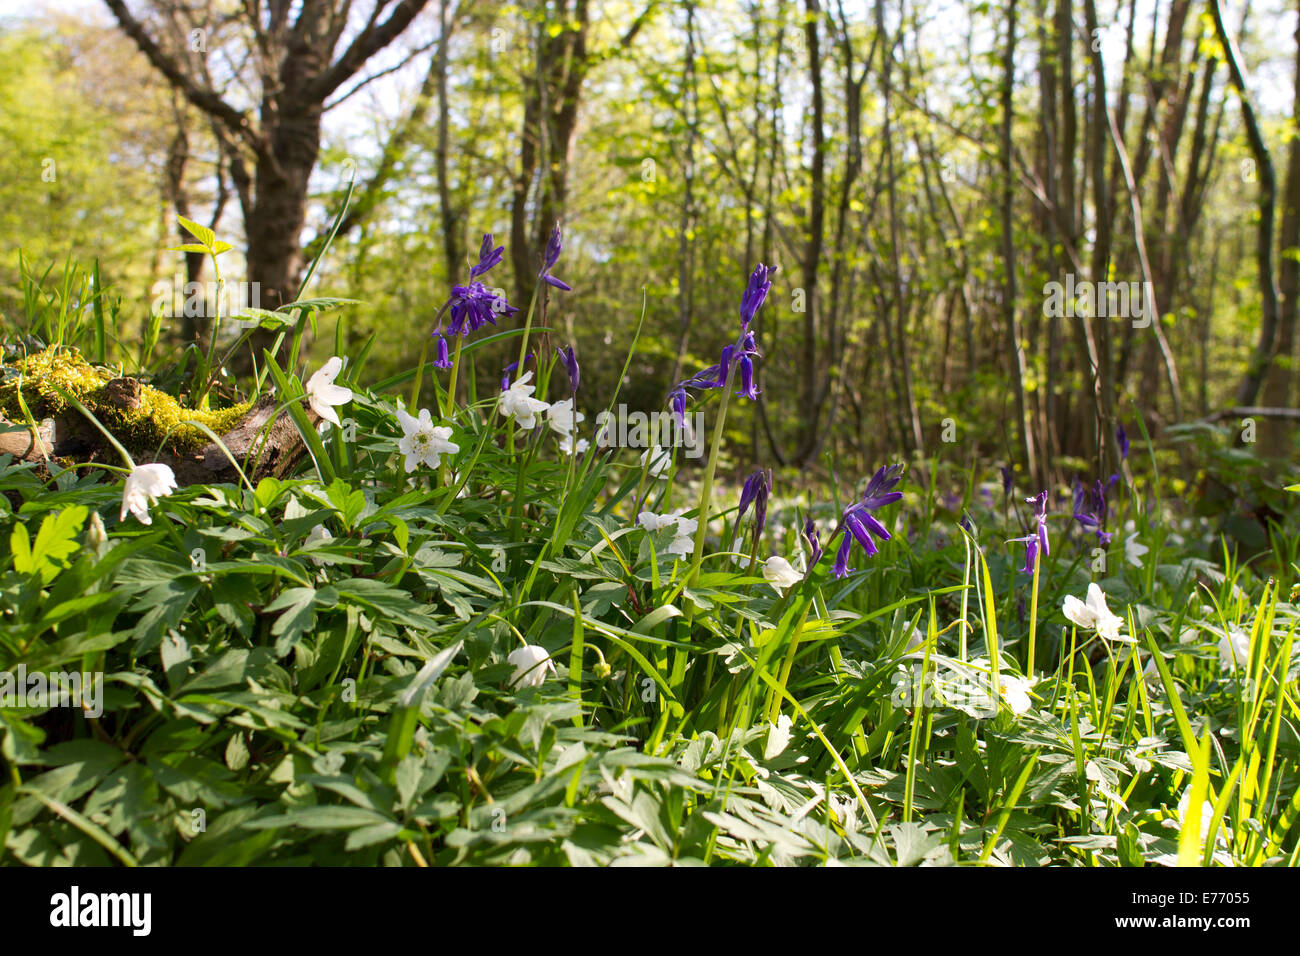 Bluebells (Hyacinthoides non-scripta) and Wood Anemones (Anemone nemorosa) flowering. Moat Wood, East Hoathly, Sussex. Stock Photo